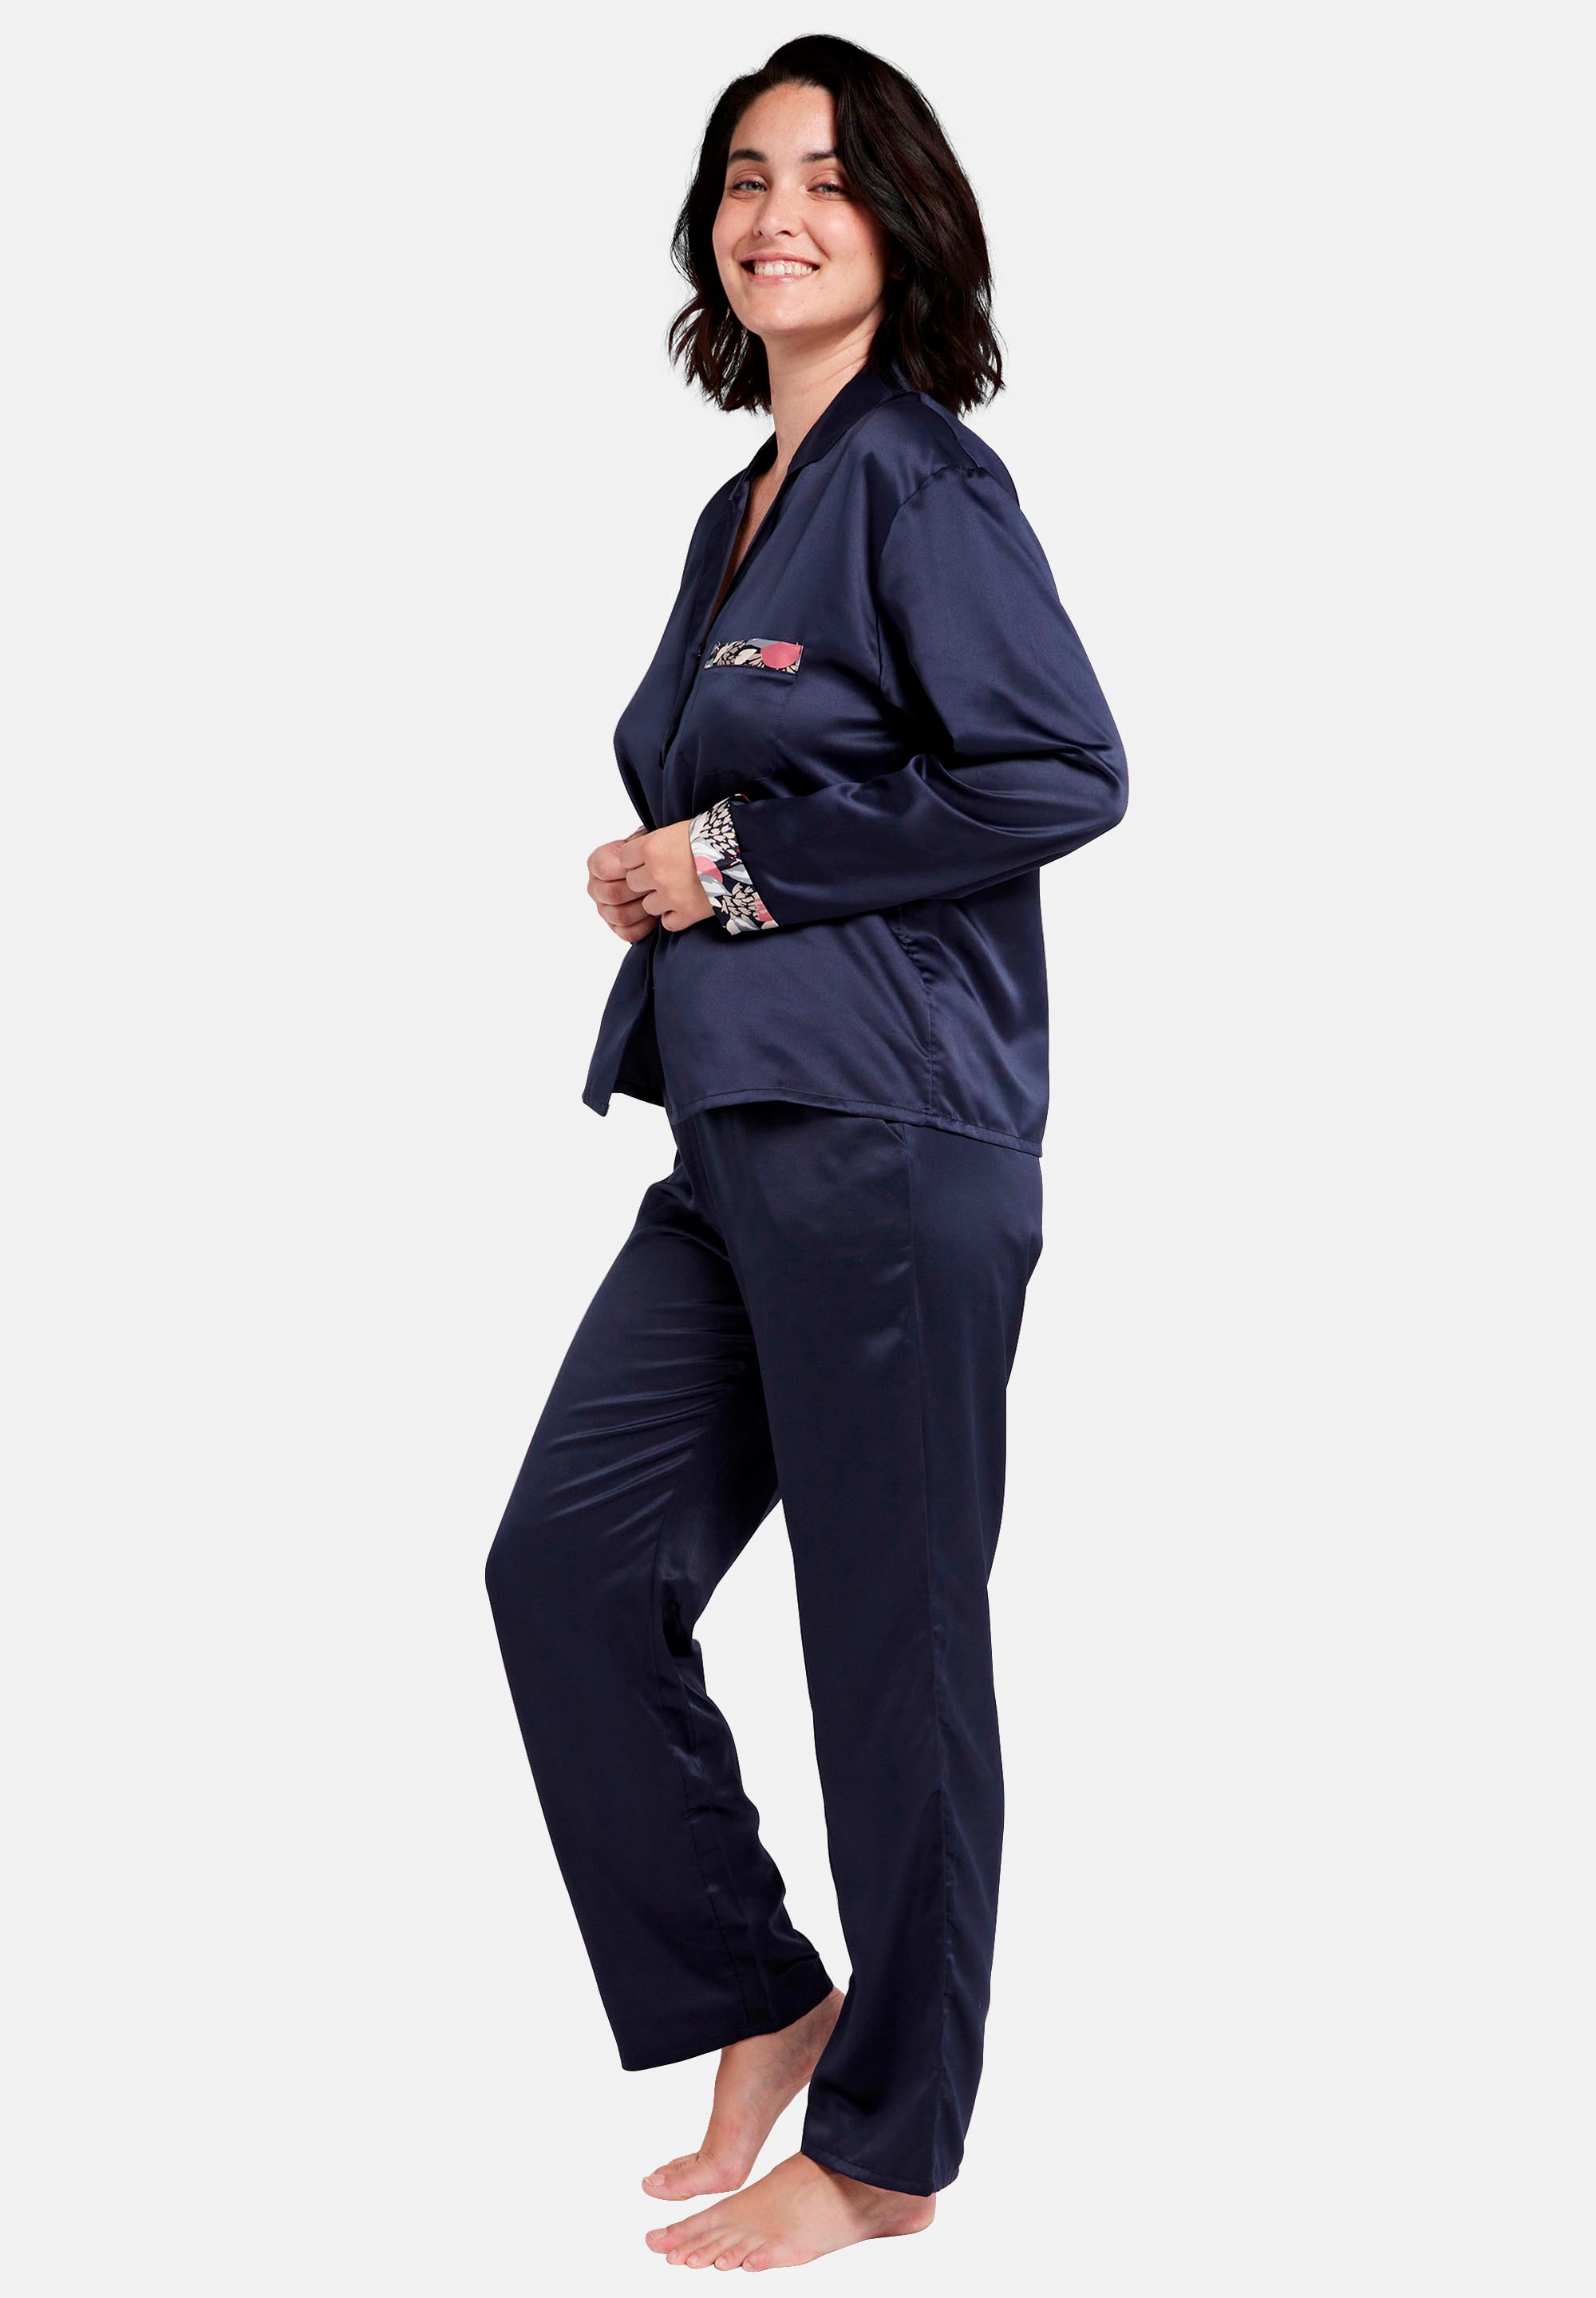 Trousers In Style Navy Blue